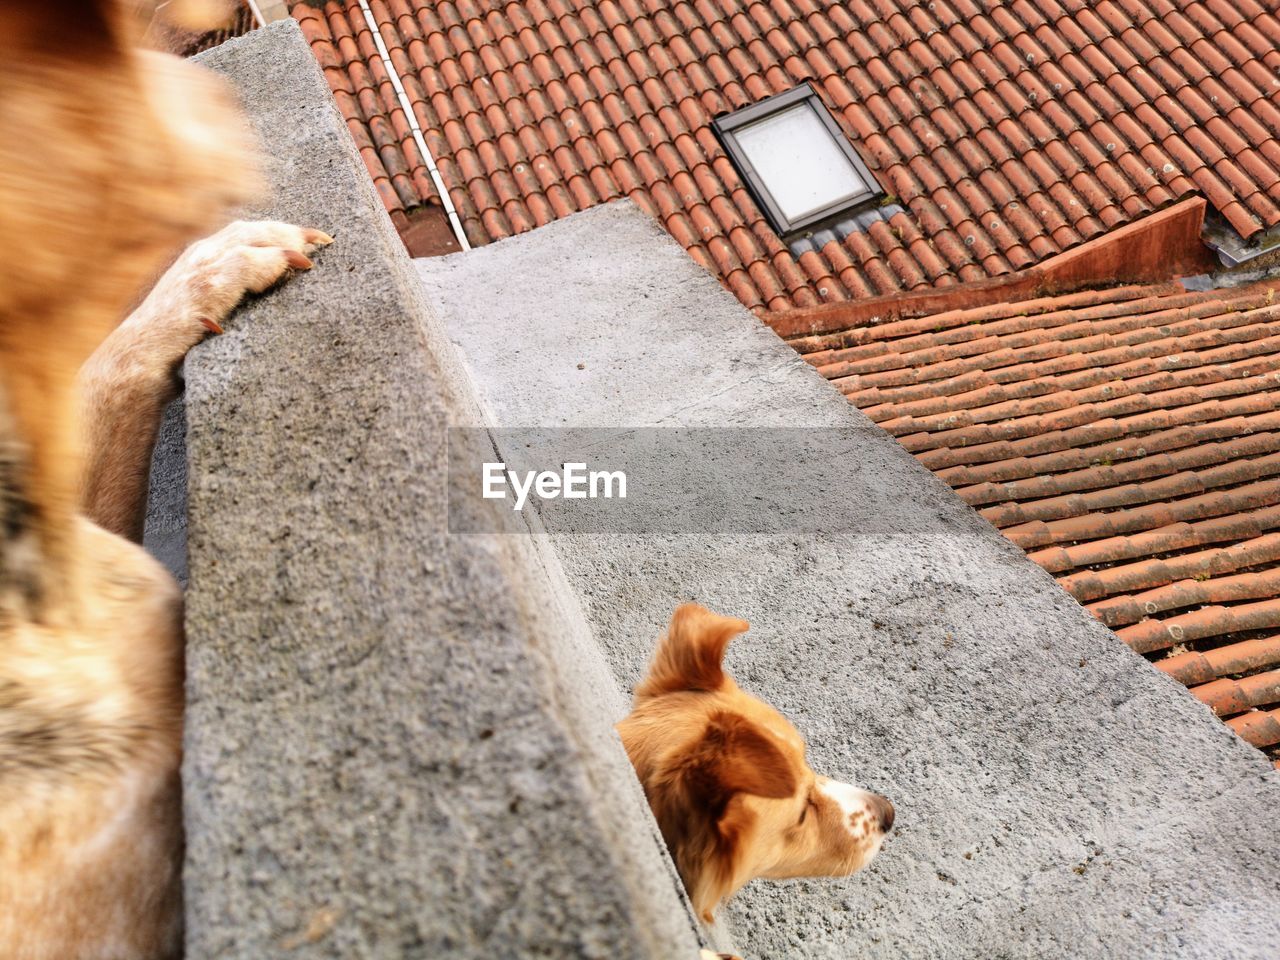 High angle view of a dog on a house